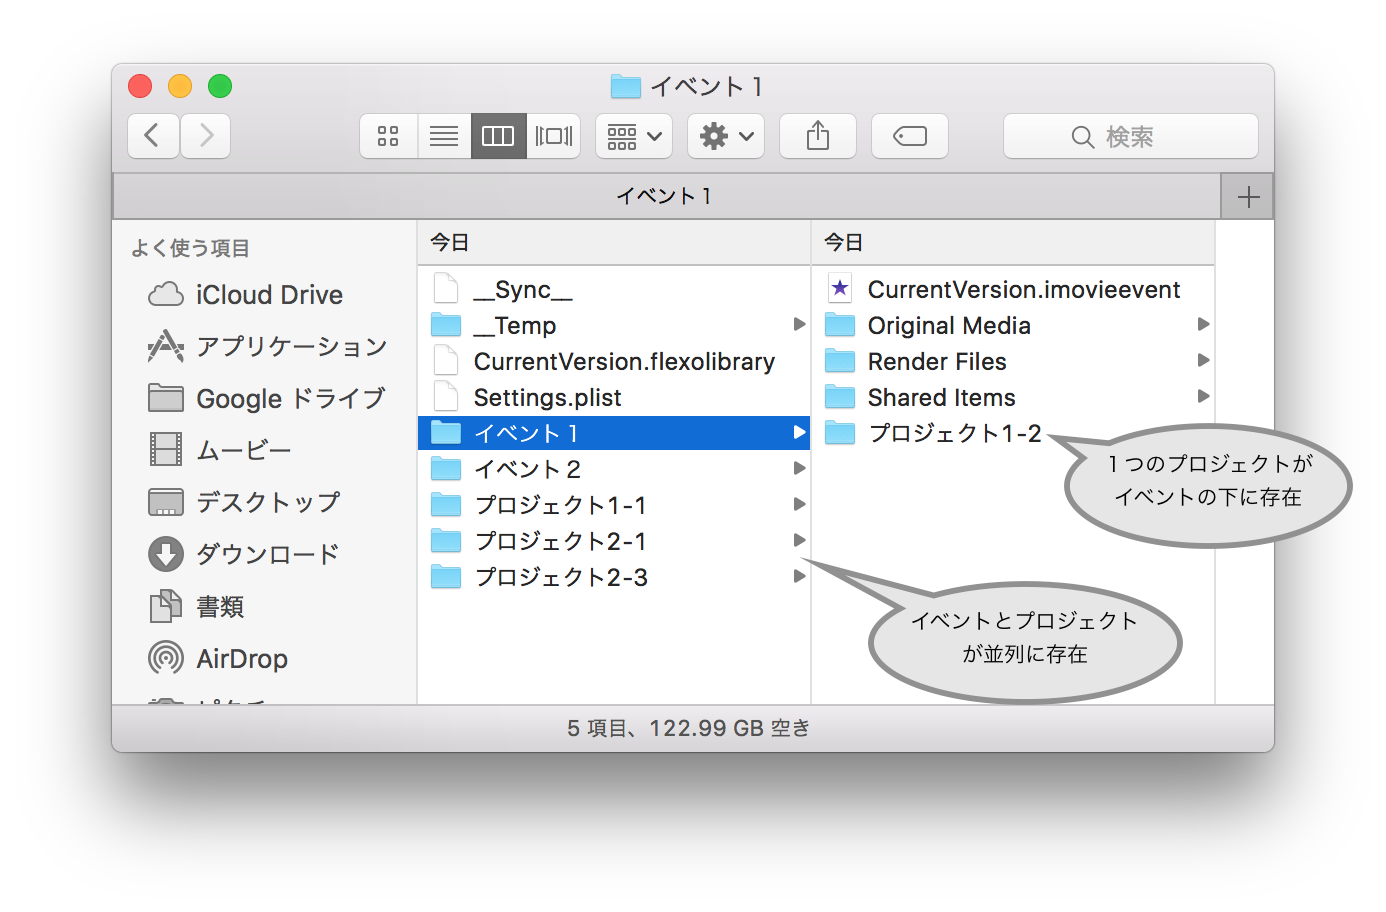 how to export to.mp4 in imovie 10.0.6